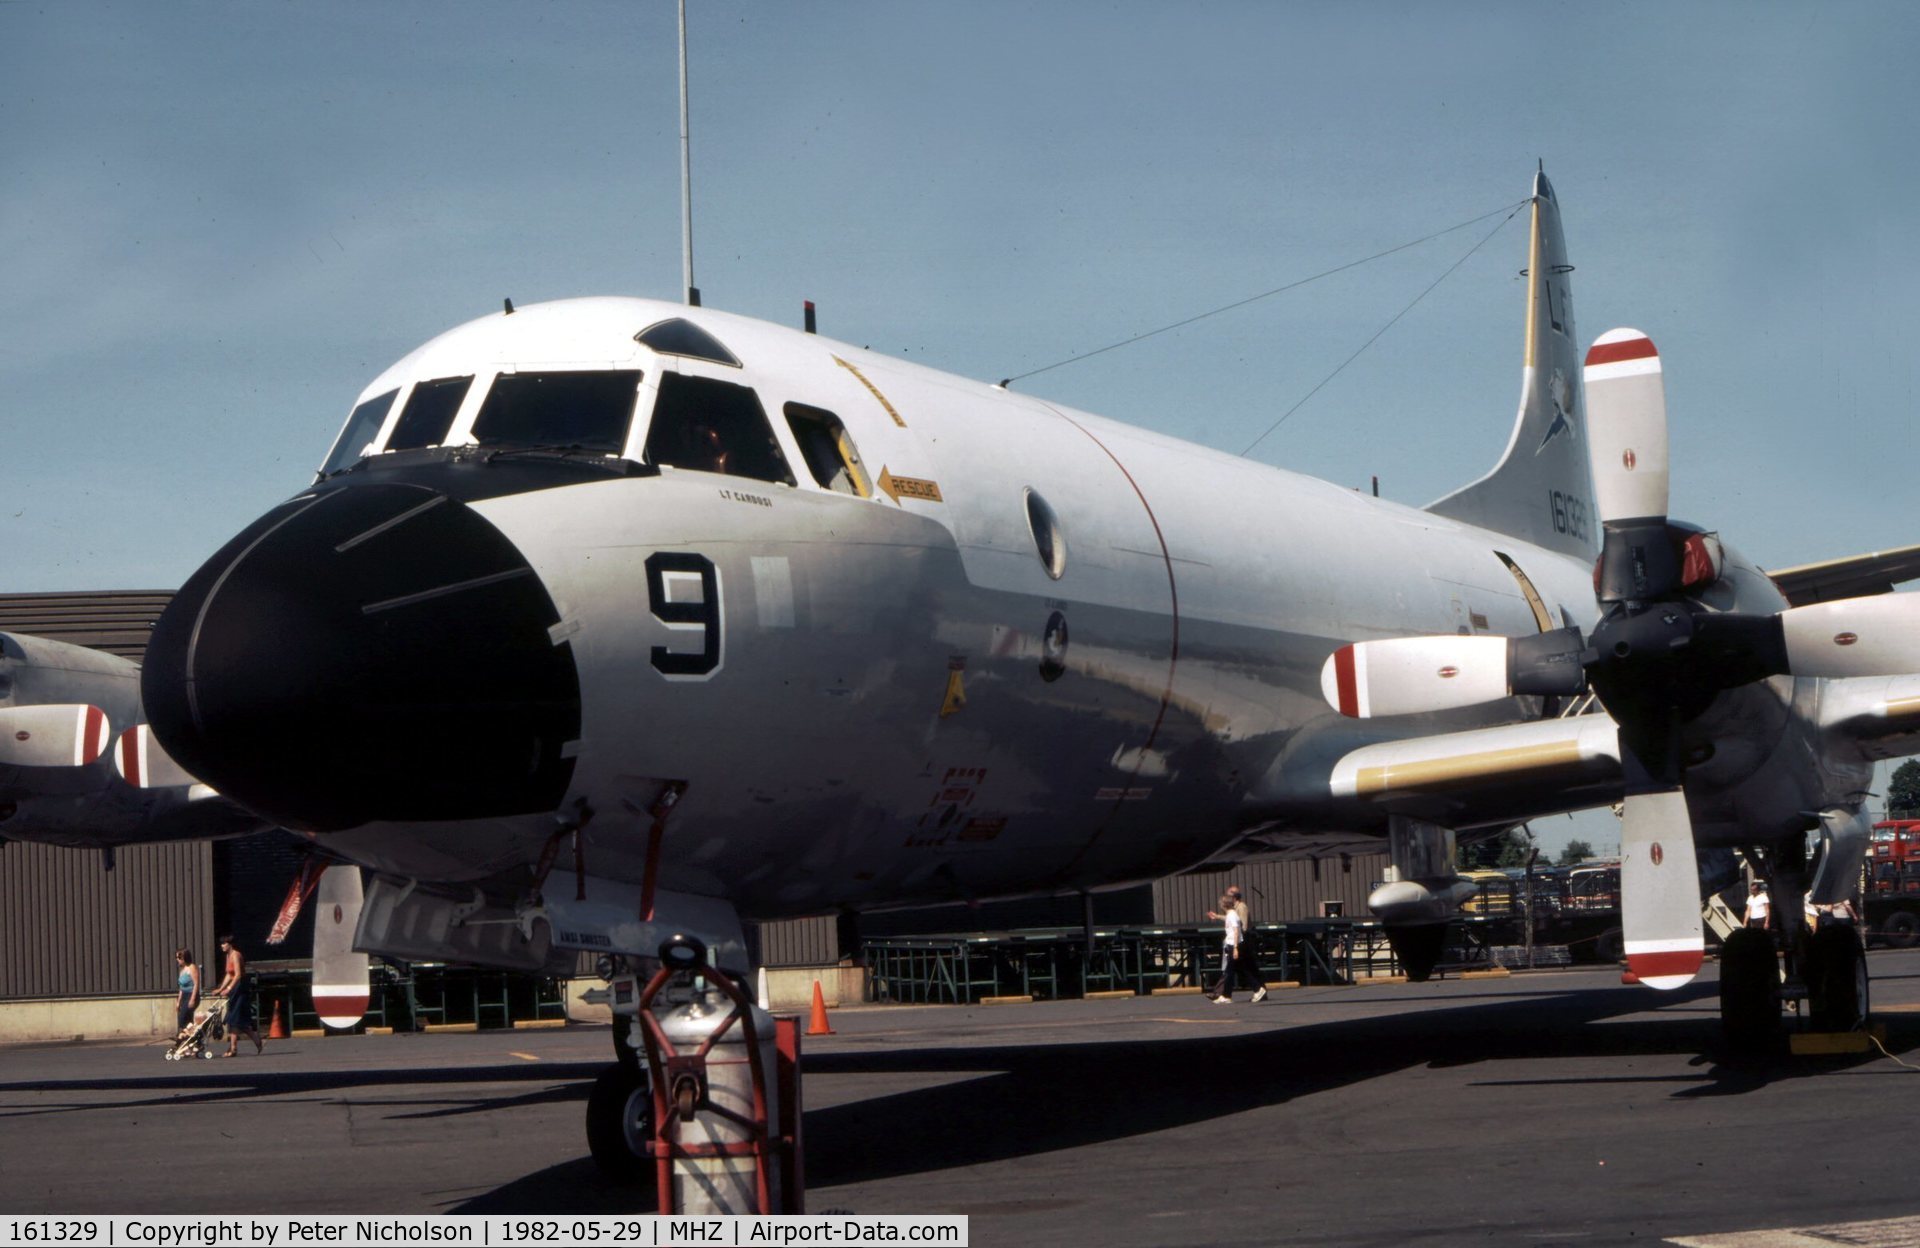 161329, Lockheed P-3C Orion C/N 285A-5726, Patrol Squadron VP-11's P-3C Orion on display at the 1982 RAF Mildenhall Air Fete.